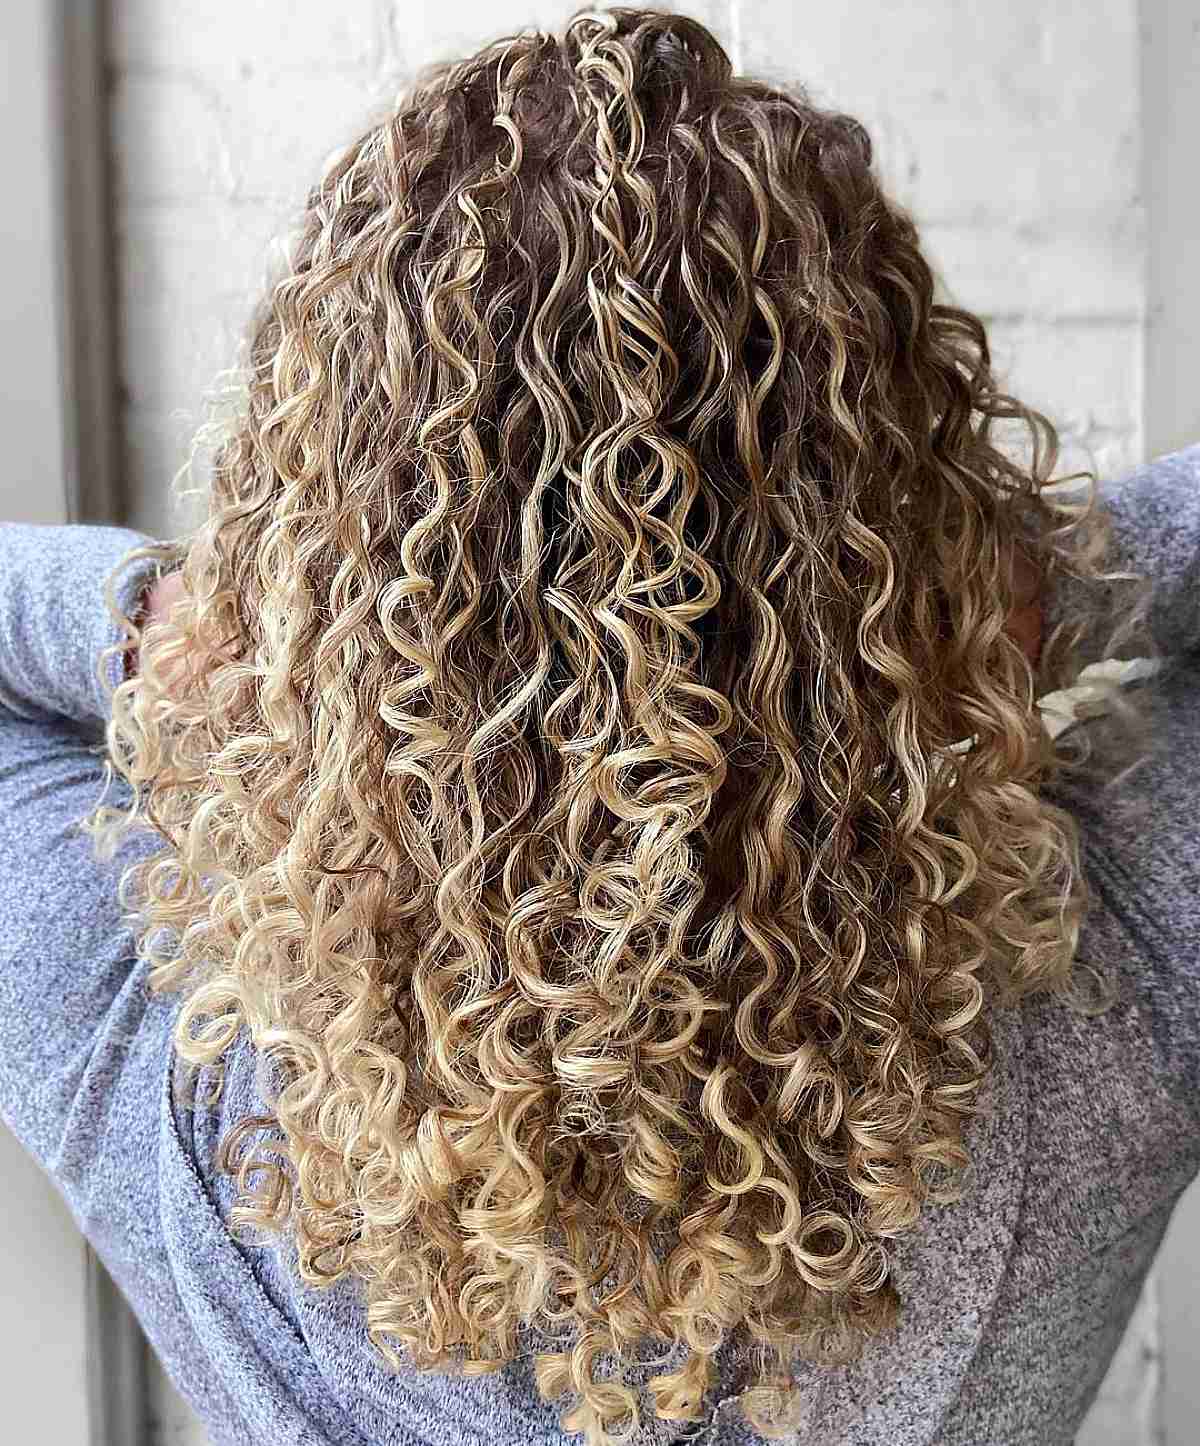 Balayage for Curly Hair: 25 Stunning Ideas